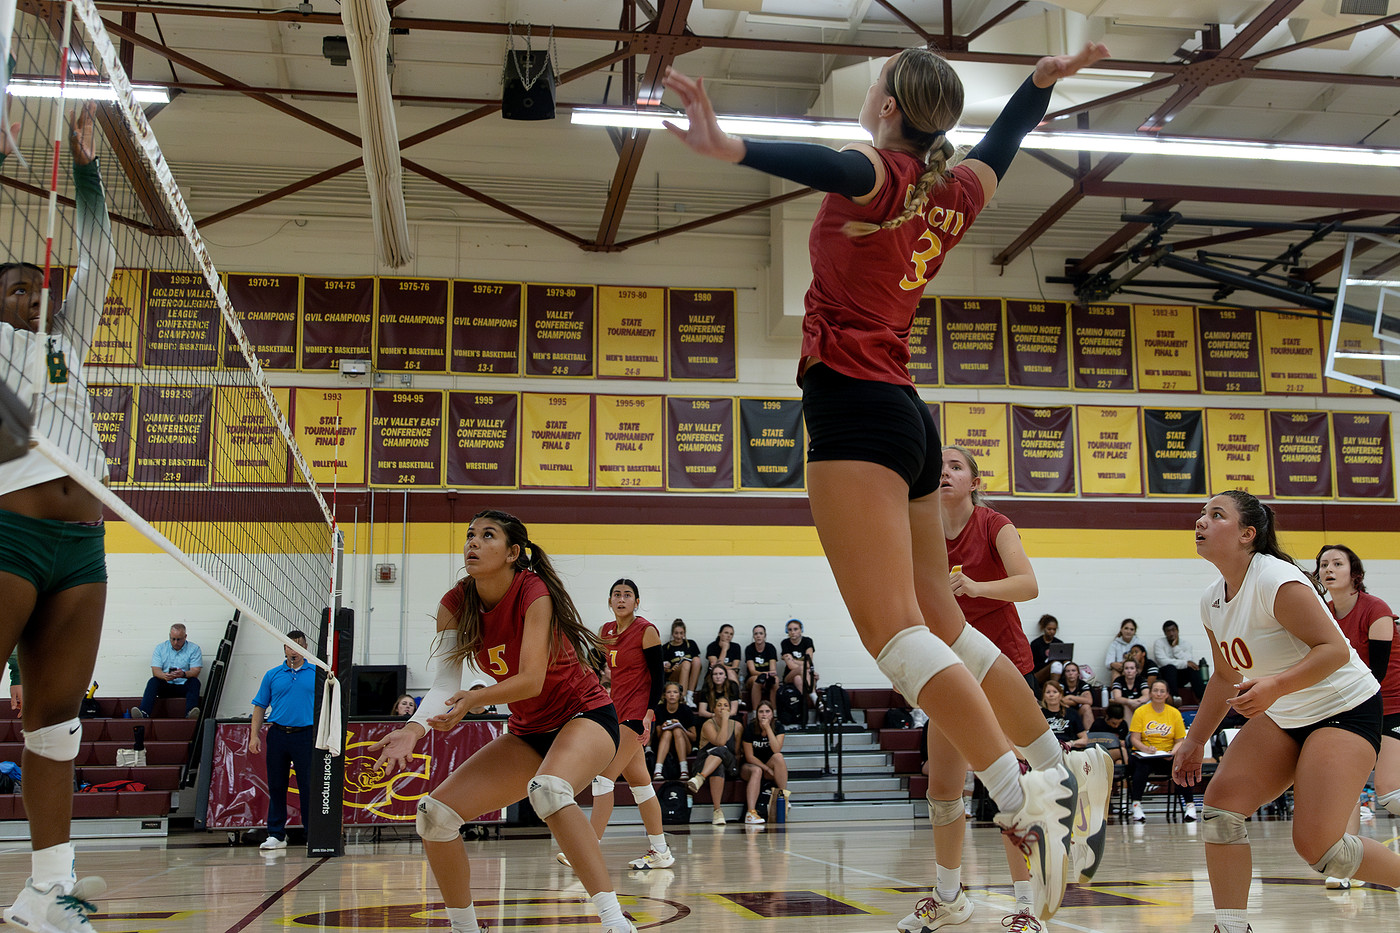 The Panthers continue their winning ways with a 3-2 (21-25, 25-17, 25-21, 17-25, 15-7) win at Los Medanos